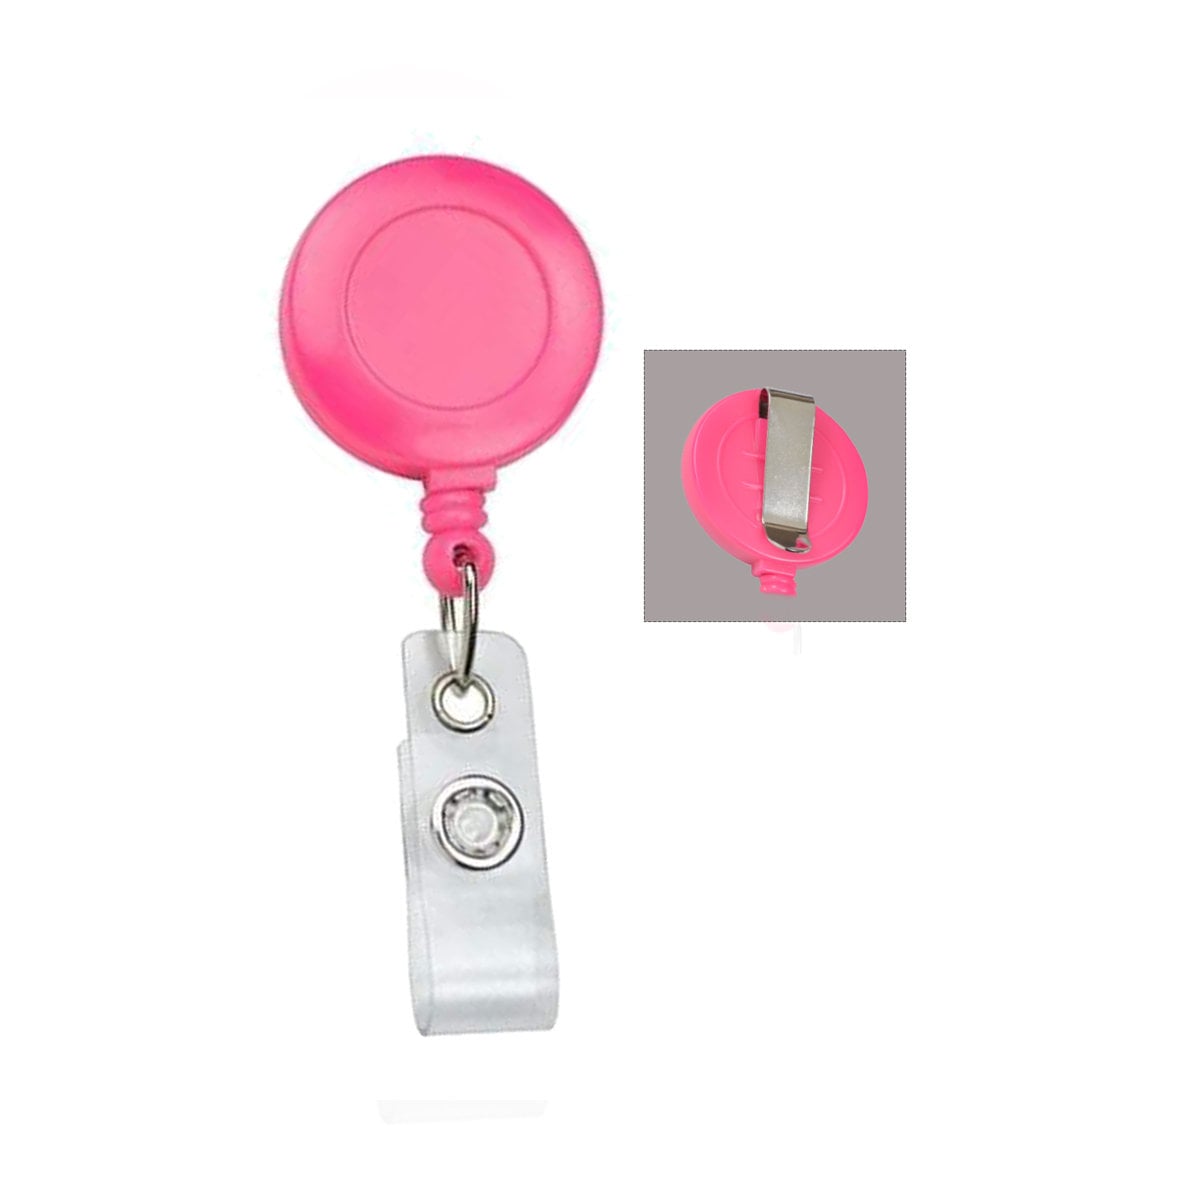 5 Pack - Hot Pink Badge Reels - Retractable ID Holders with Zip Cord Bright Neon Pink with Metal Belt Clip by Specialist ID (Pink)